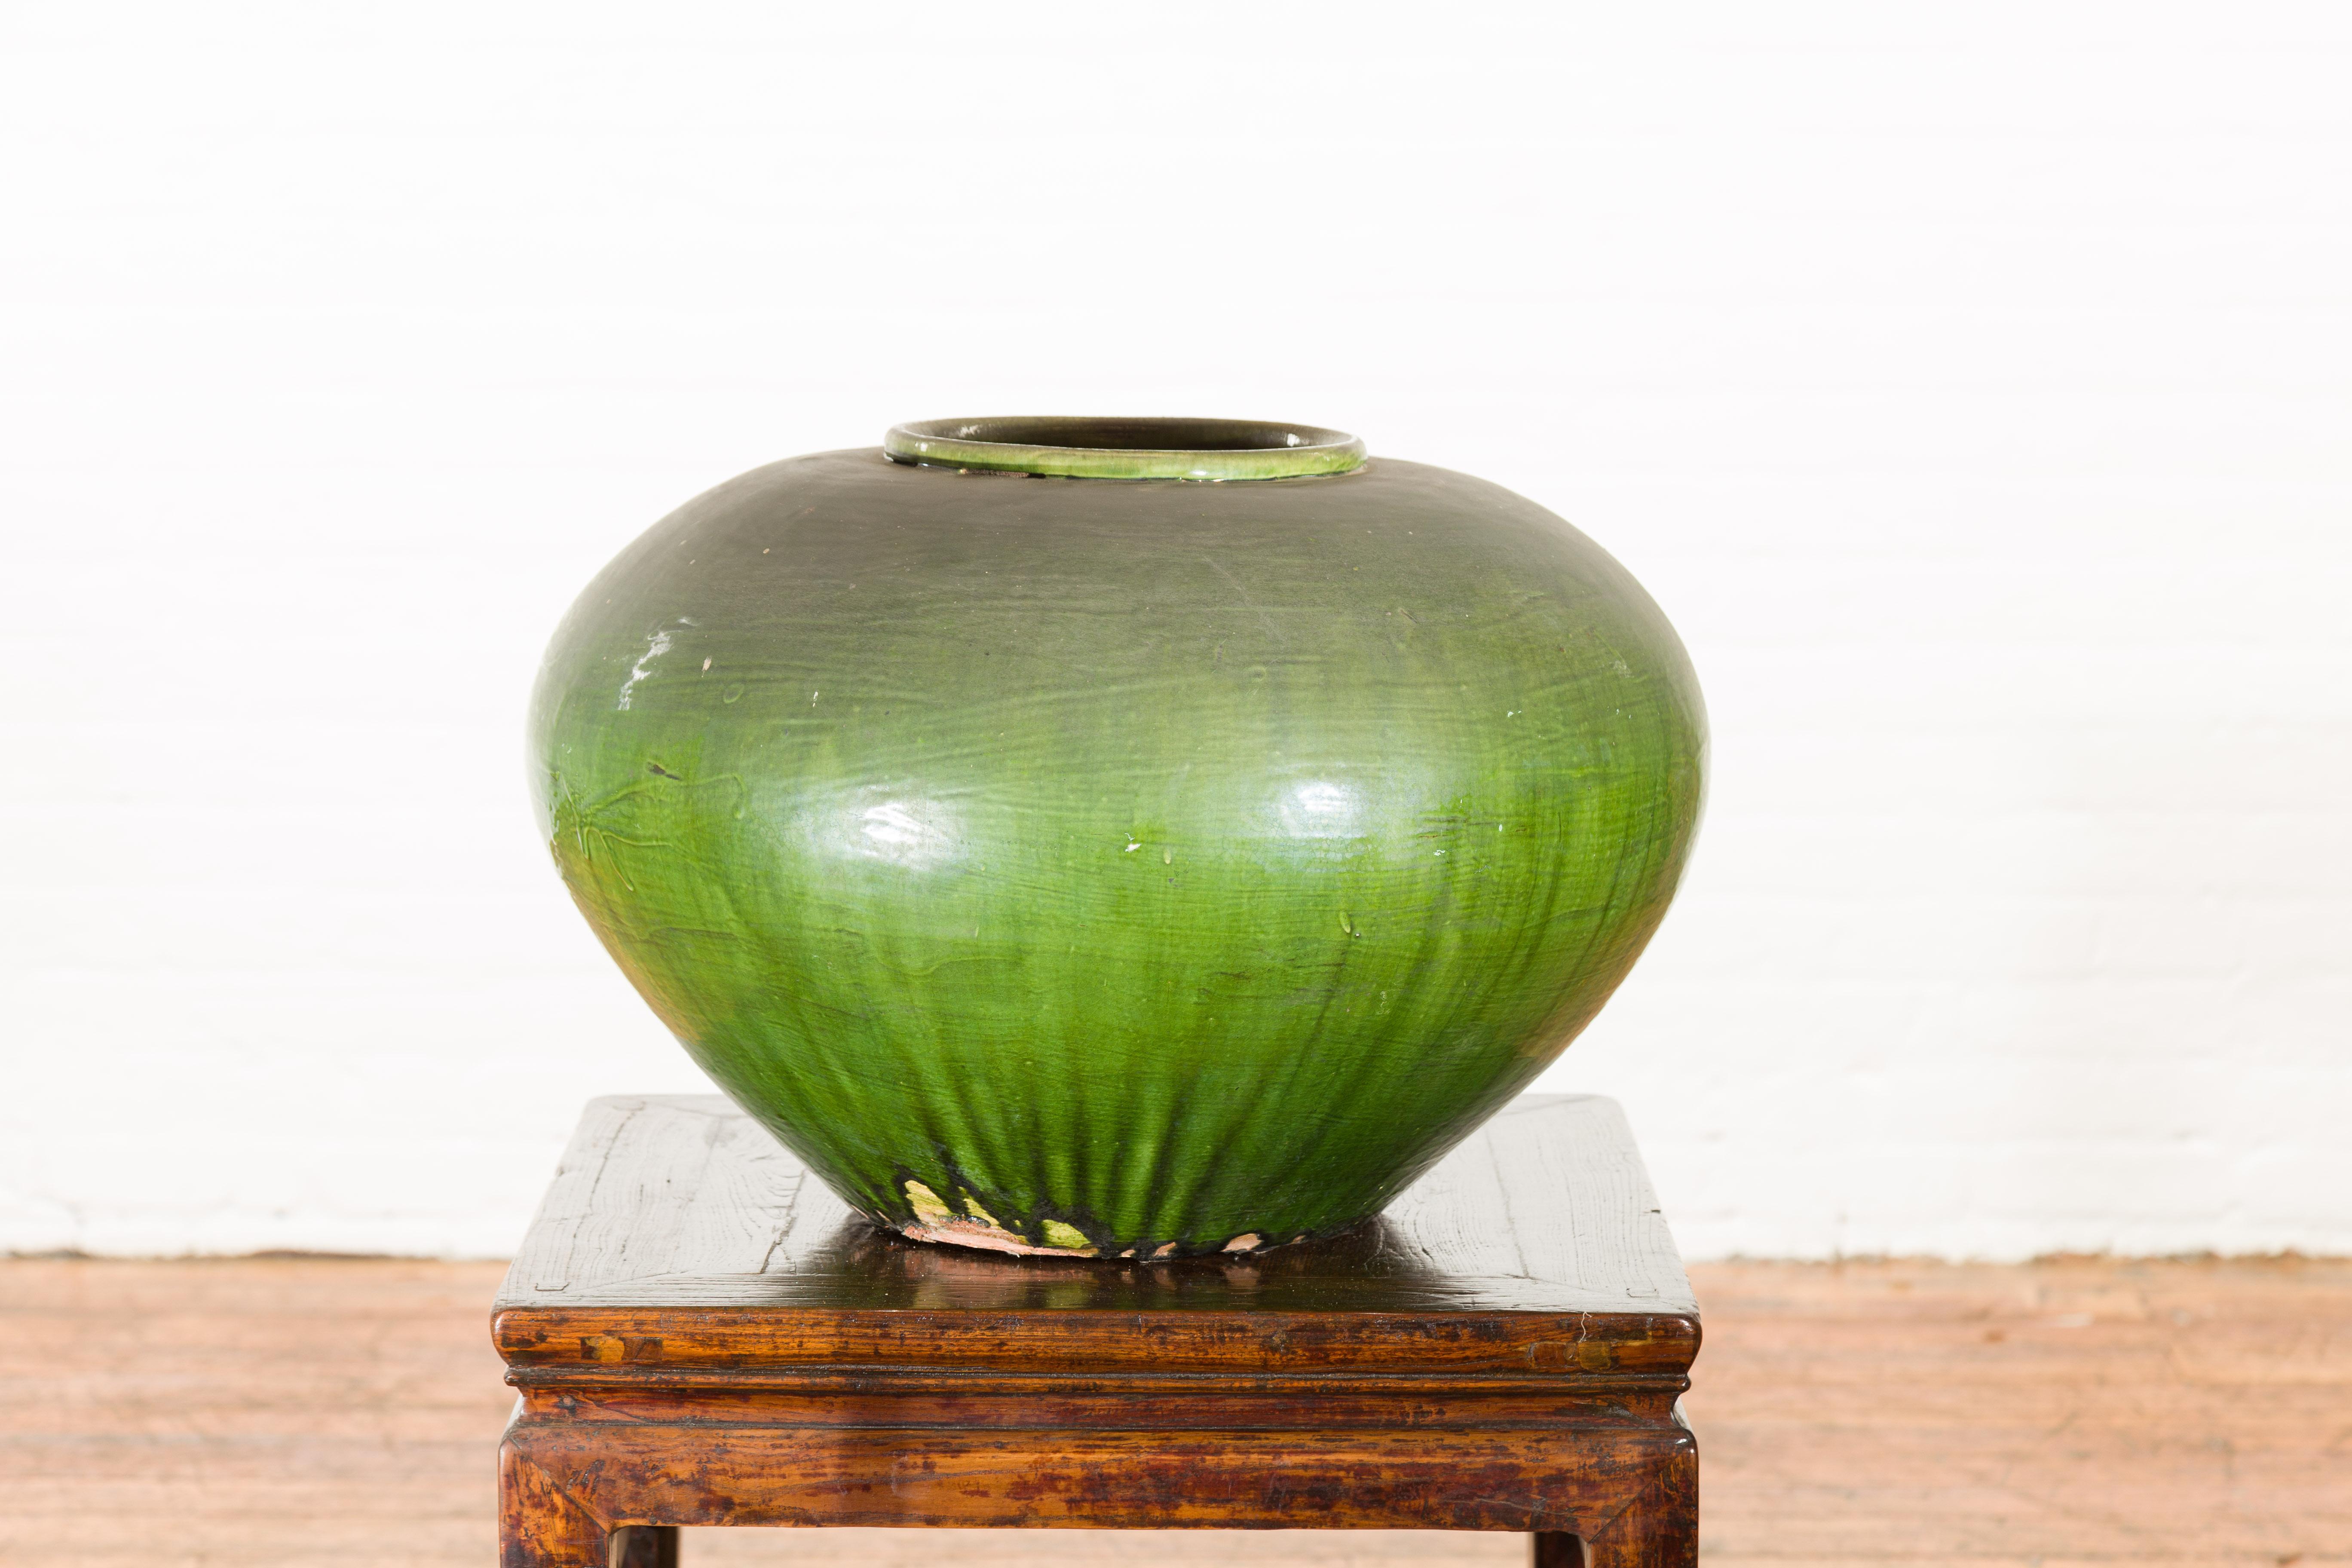 Chinese Vintage Porcelain Low Squat Planter with Verde Glaze and Aged Patina For Sale 6